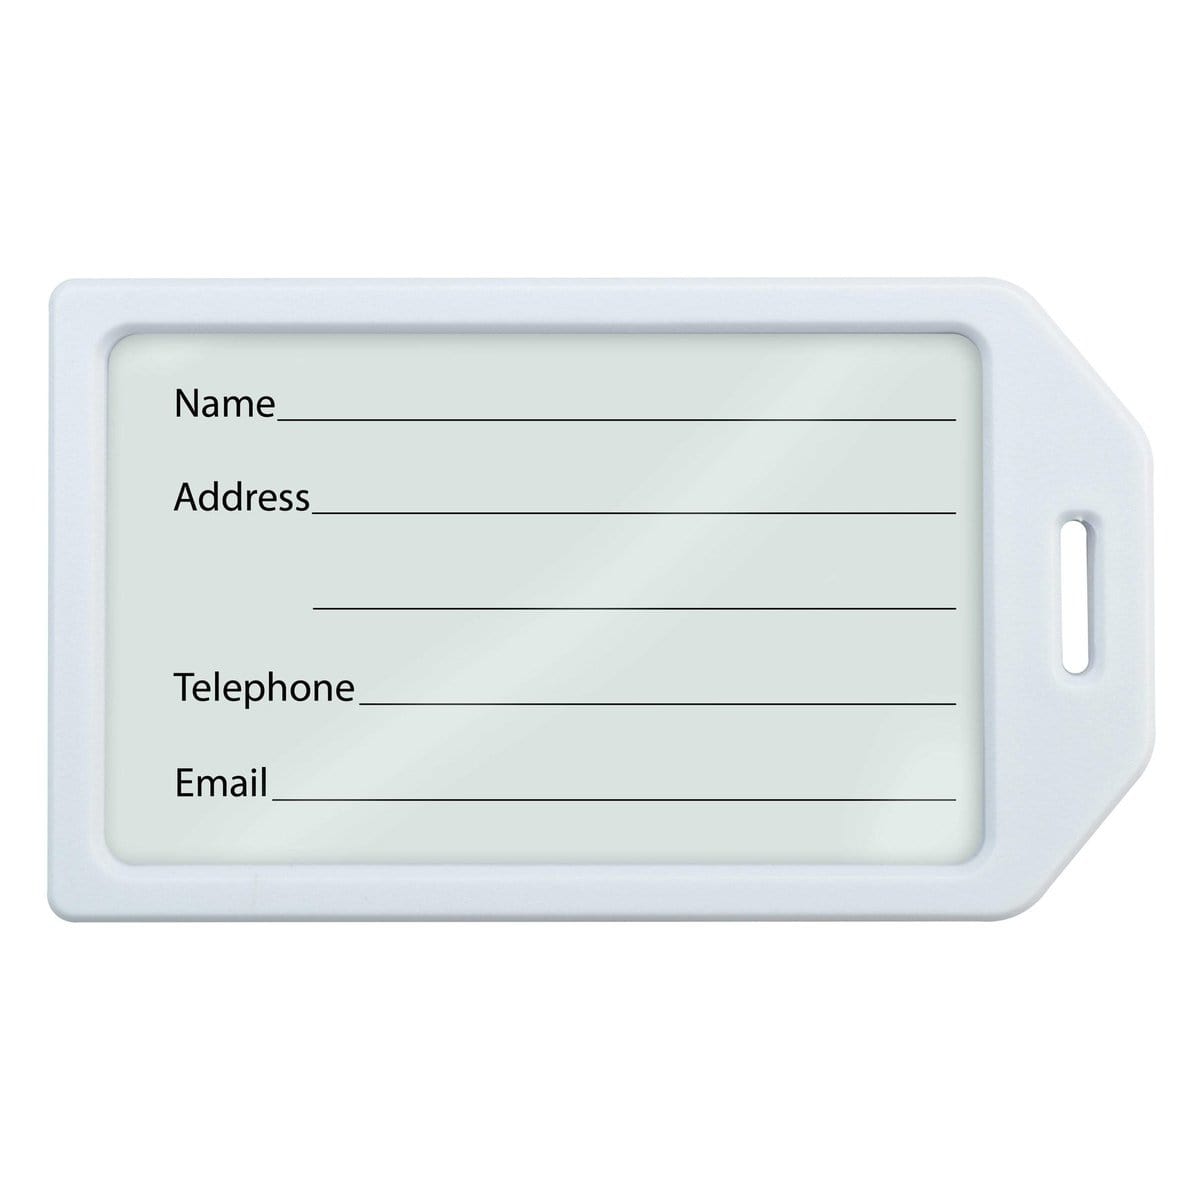 A Heavy Duty Luggage Tags with Plastic Loops Included - Window for Business Card or Included Insert (1840-620X) with blank fields labeled Name, Address, Telephone, and Email, designed for personal contact information. This sturdy and heavy duty luggage tag ensures your details stay secure during travel.